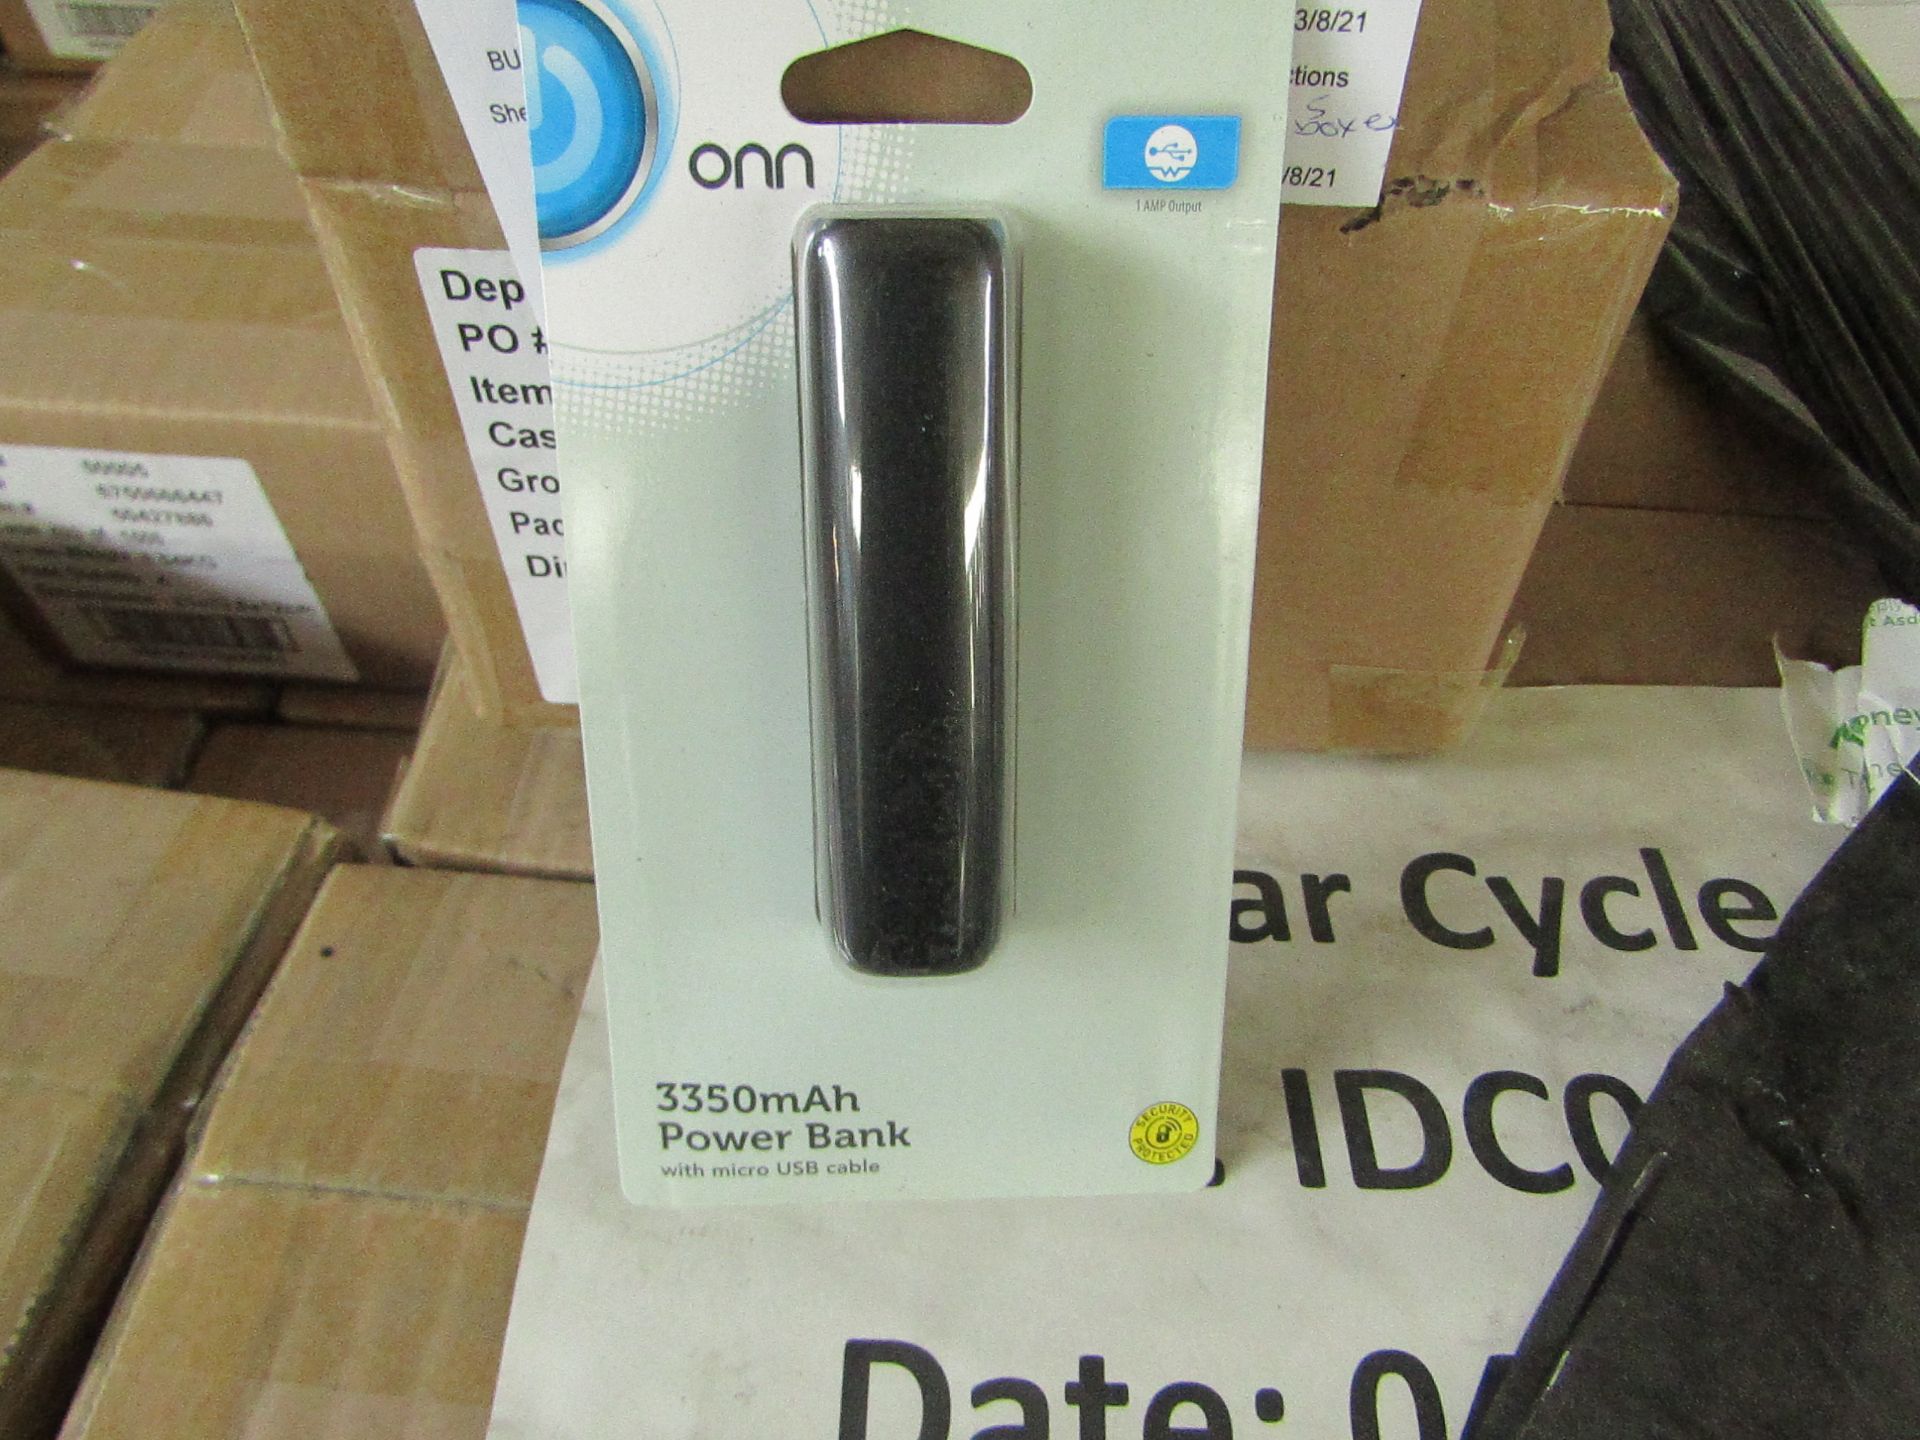 | 5x | ONN 3350MAH BOX OF 4 POWER BANK WITH MICRO USB CABLE | NEW & BOXED | NO ONLINE RESALE | SKU